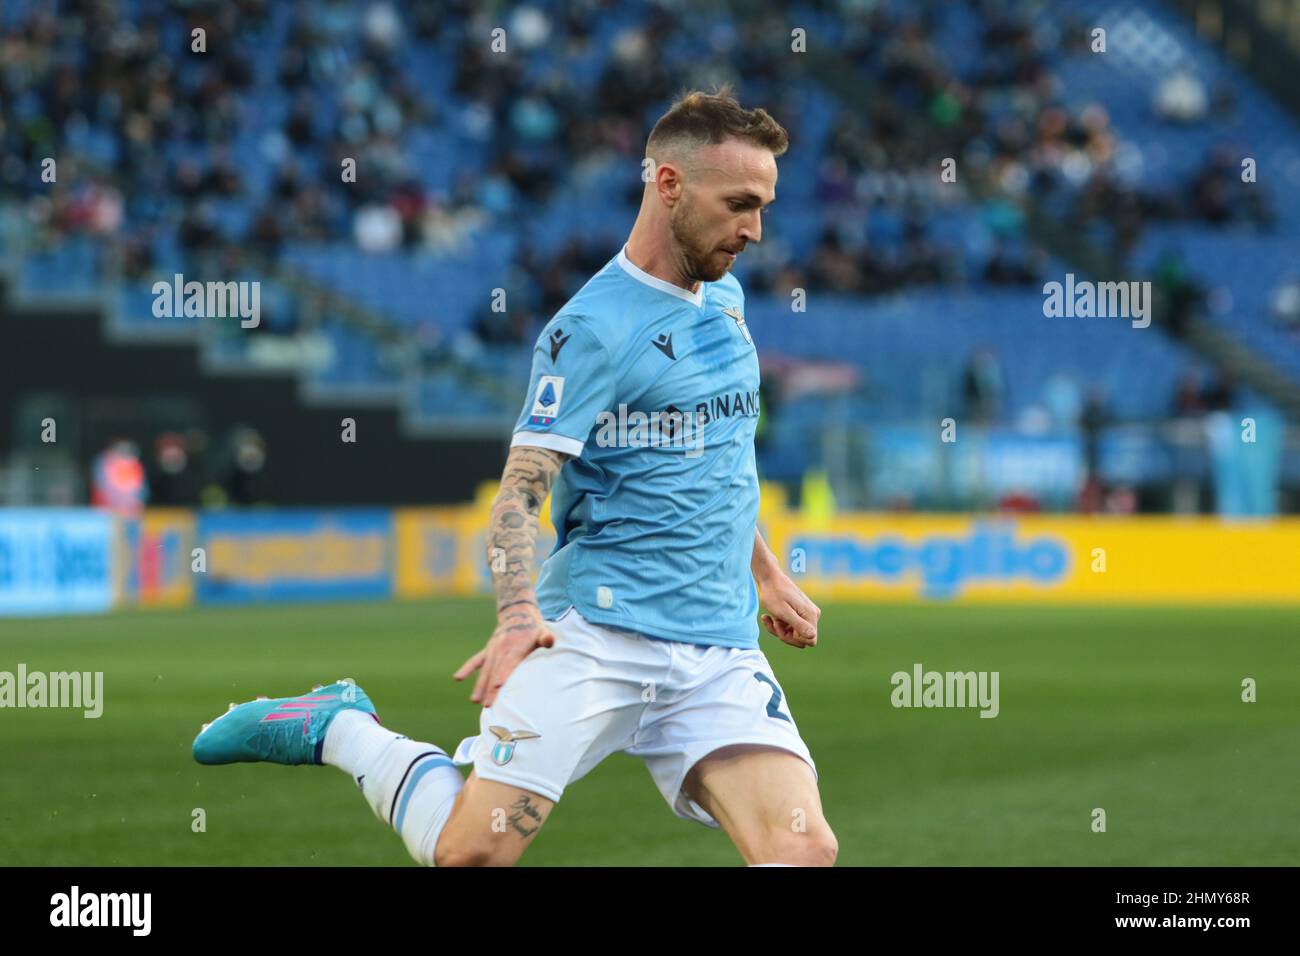 Rome, Rome, Italy. 12th Feb, 2022. Manuel Lazzari of SS LAZIO gestures  during the Italian Serie A 2021/22 football match between S.S. Lazio and  Bologna FC at the Olimpico Stadium in Rome,